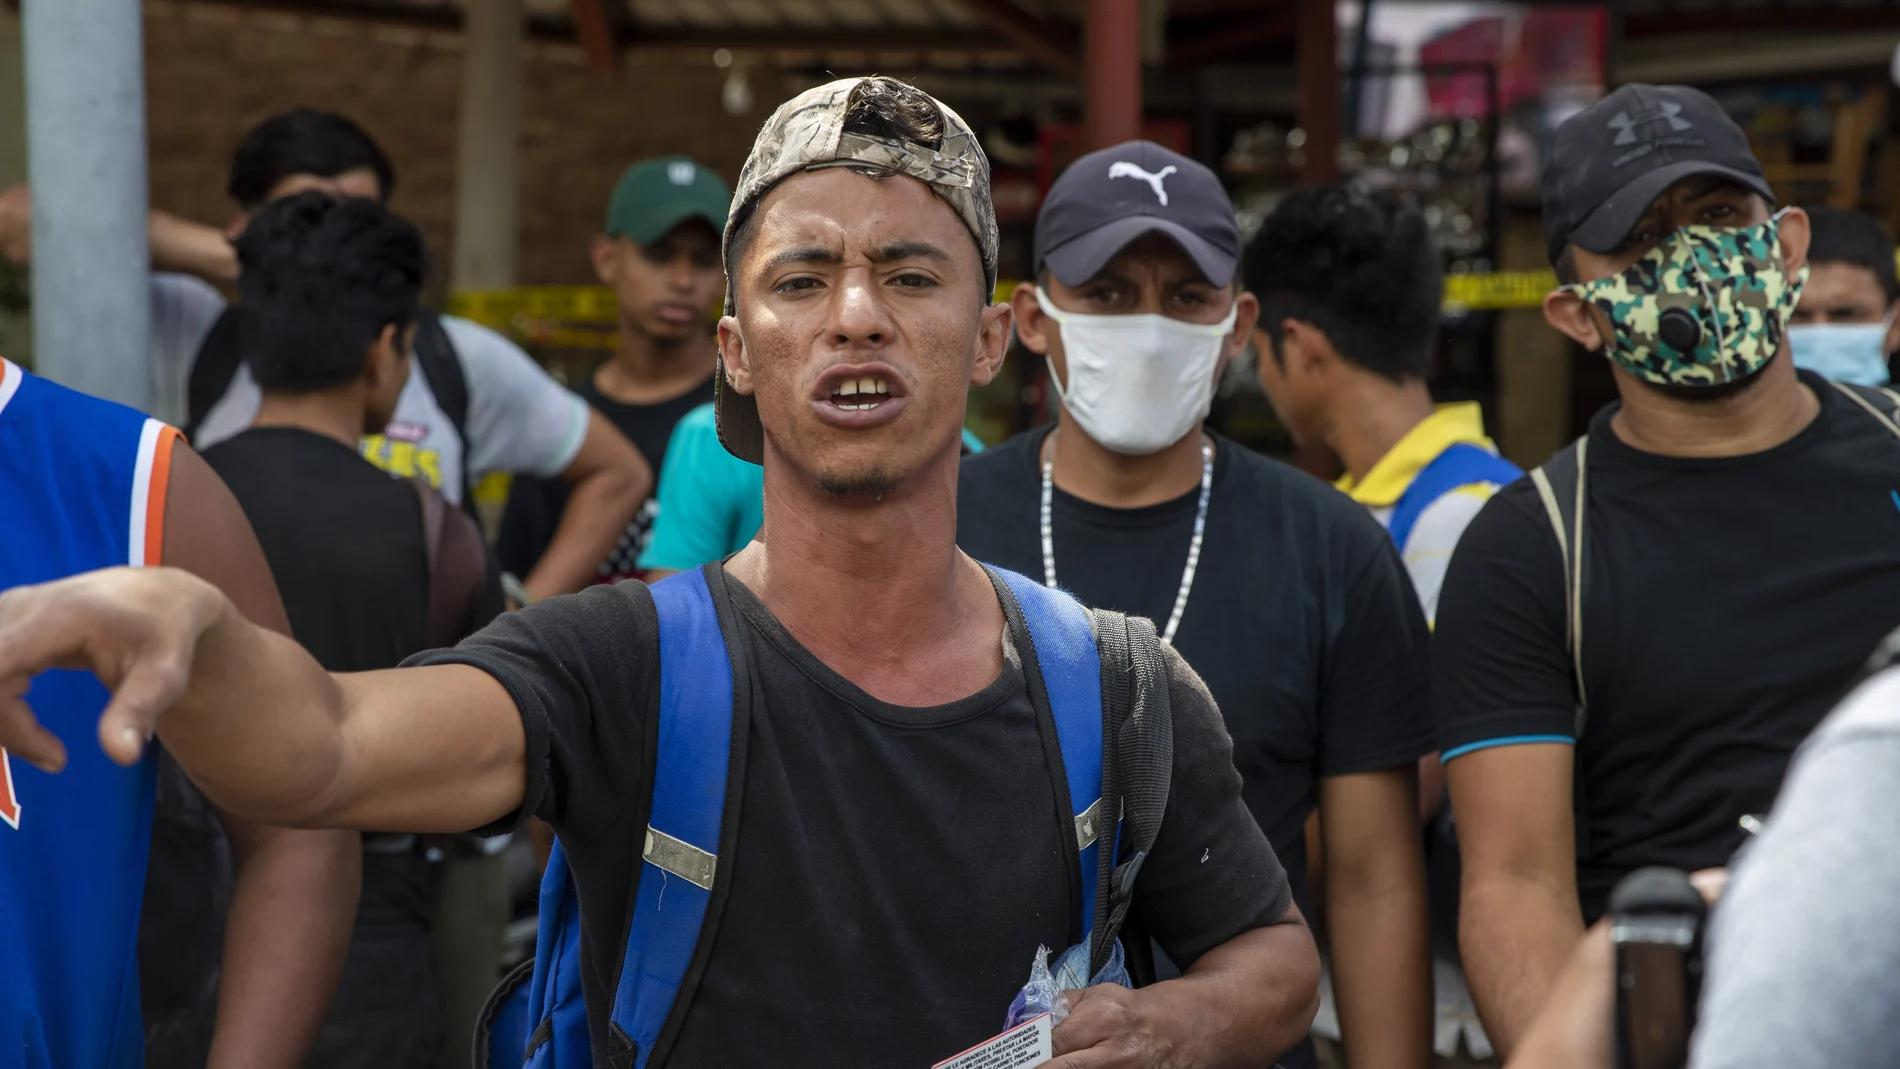 A Honduras migrant gestures as he talks with police before returning home, in Morales, Guatemala, Saturday, Oct. 3, 2020. Early Saturday, hundreds of migrants who had entered Guatemala this week without registering were being bused back to their country's border by authorities after running into a large roadblock. (AP Photo/Moises Castillo)